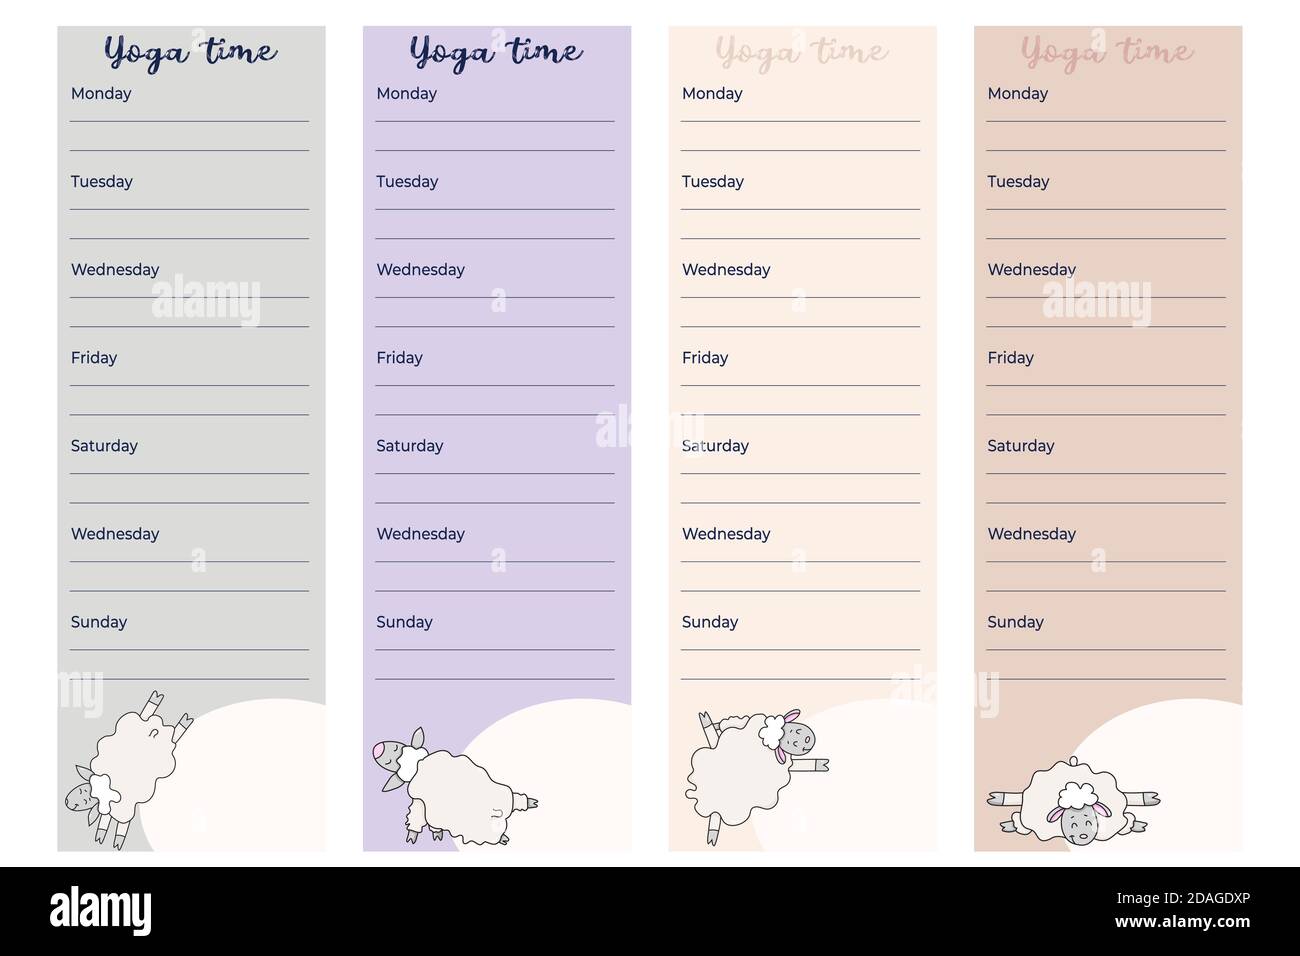 Cute Weekly Planner Templates Design With Weekly Sports Schedule With Cute Funny Sheep Doing Yoga Asanas And Meditating Yoga Time Planner Organiz Stock Vector Image Art Alamy